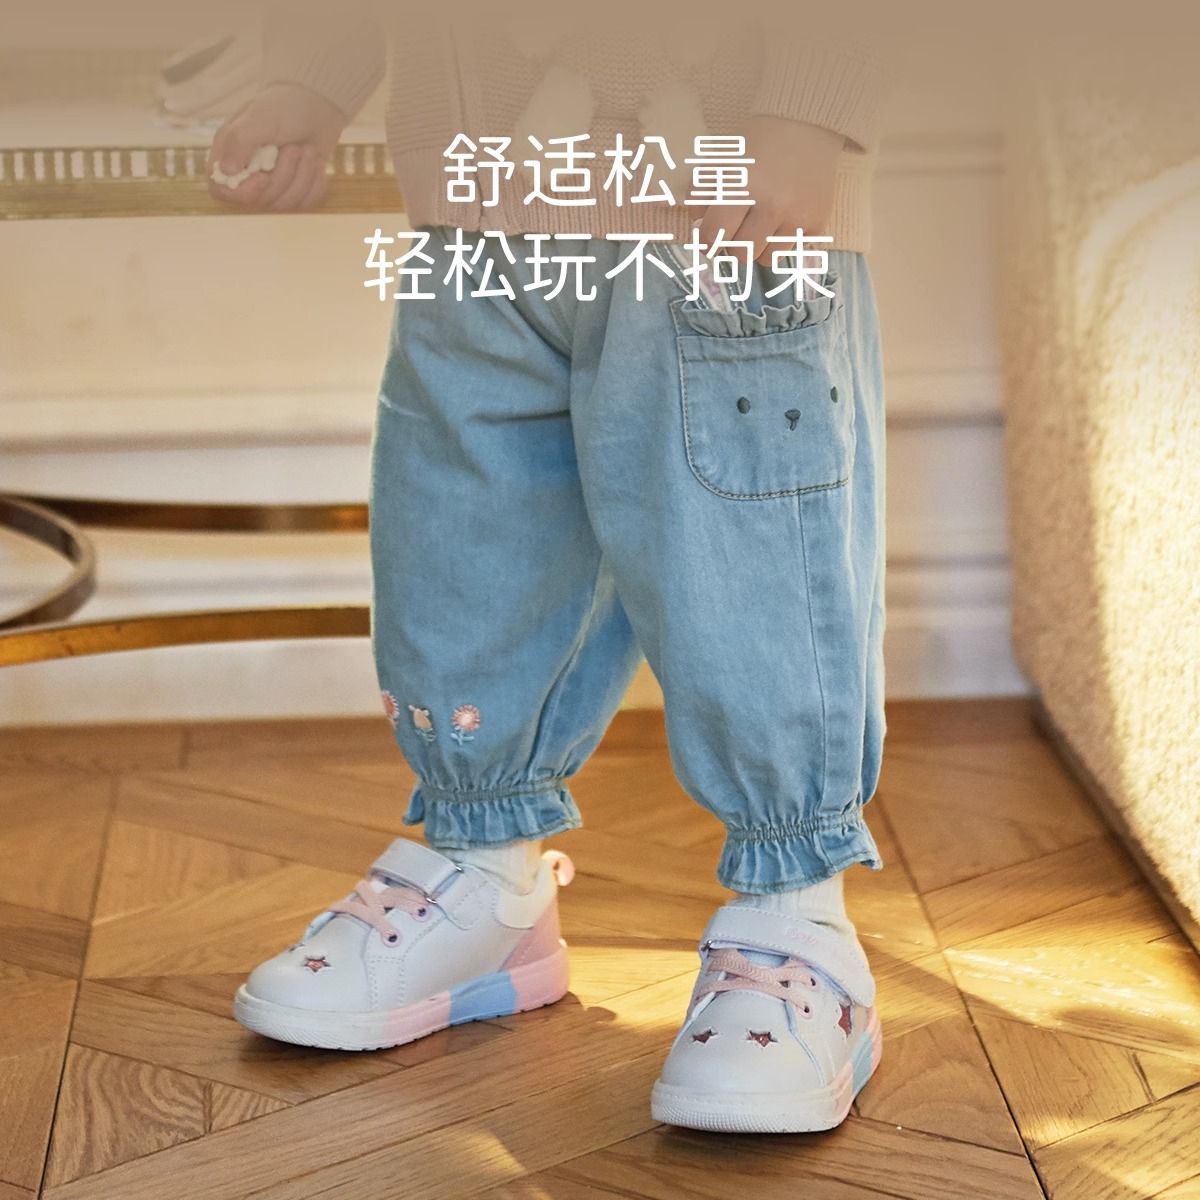 Girls' pure cotton jeans  autumn new style children's fashionable pants girls' casual trousers elastic waist children's clothing